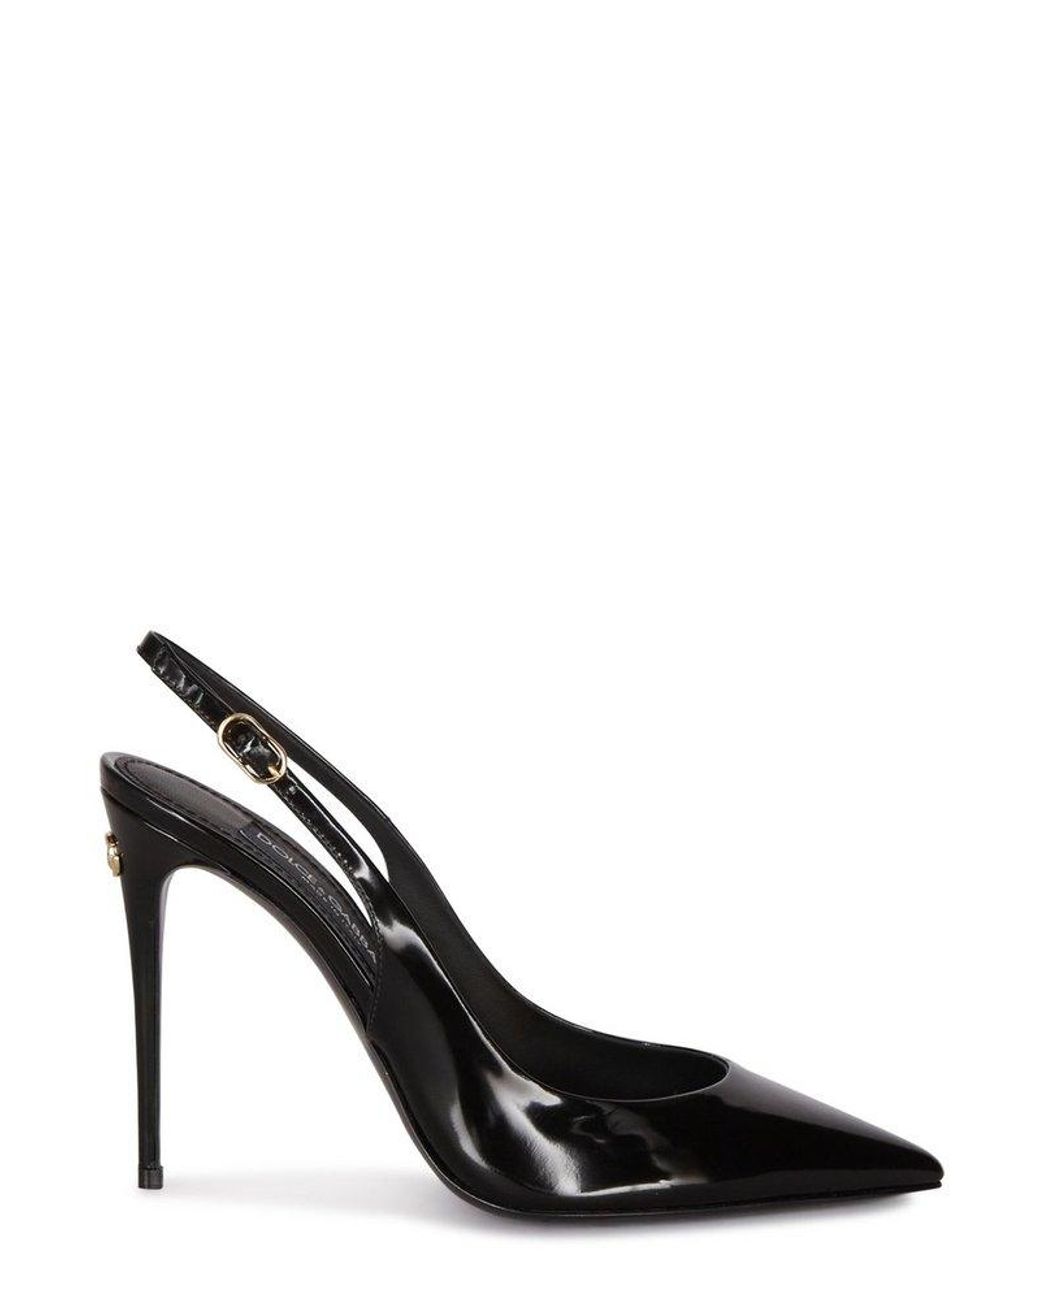 Dolce & Gabbana Logo-plaque Pointed-toe Slingback Pumps in Black | Lyst